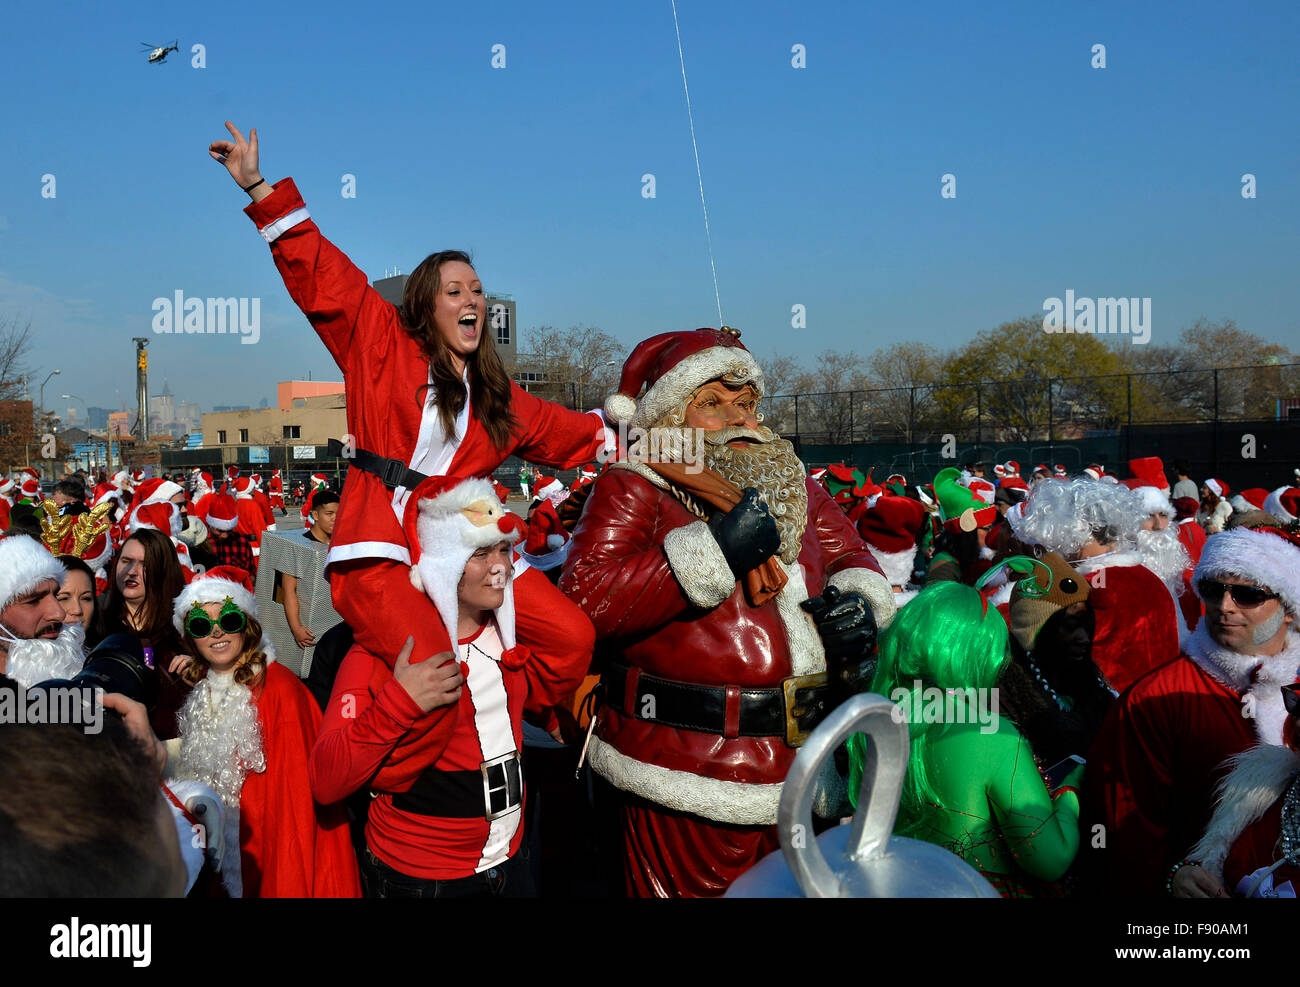 New York, USA. 12th Dec, 2015. People dressed as Santas take part in SantaCon 2015 in New York, the United States, on Dec. 12, 2015. SantaCon 2015 kicked off Saturday here in New York. SantaCon, a celebration that calls for attendees to dress as Santas and follow a pre-planned route of bar-hopping, is celebrated in cities across the U.S. and the world. Credit:  Wang Lei/Xinhua/Alamy Live News Stock Photo